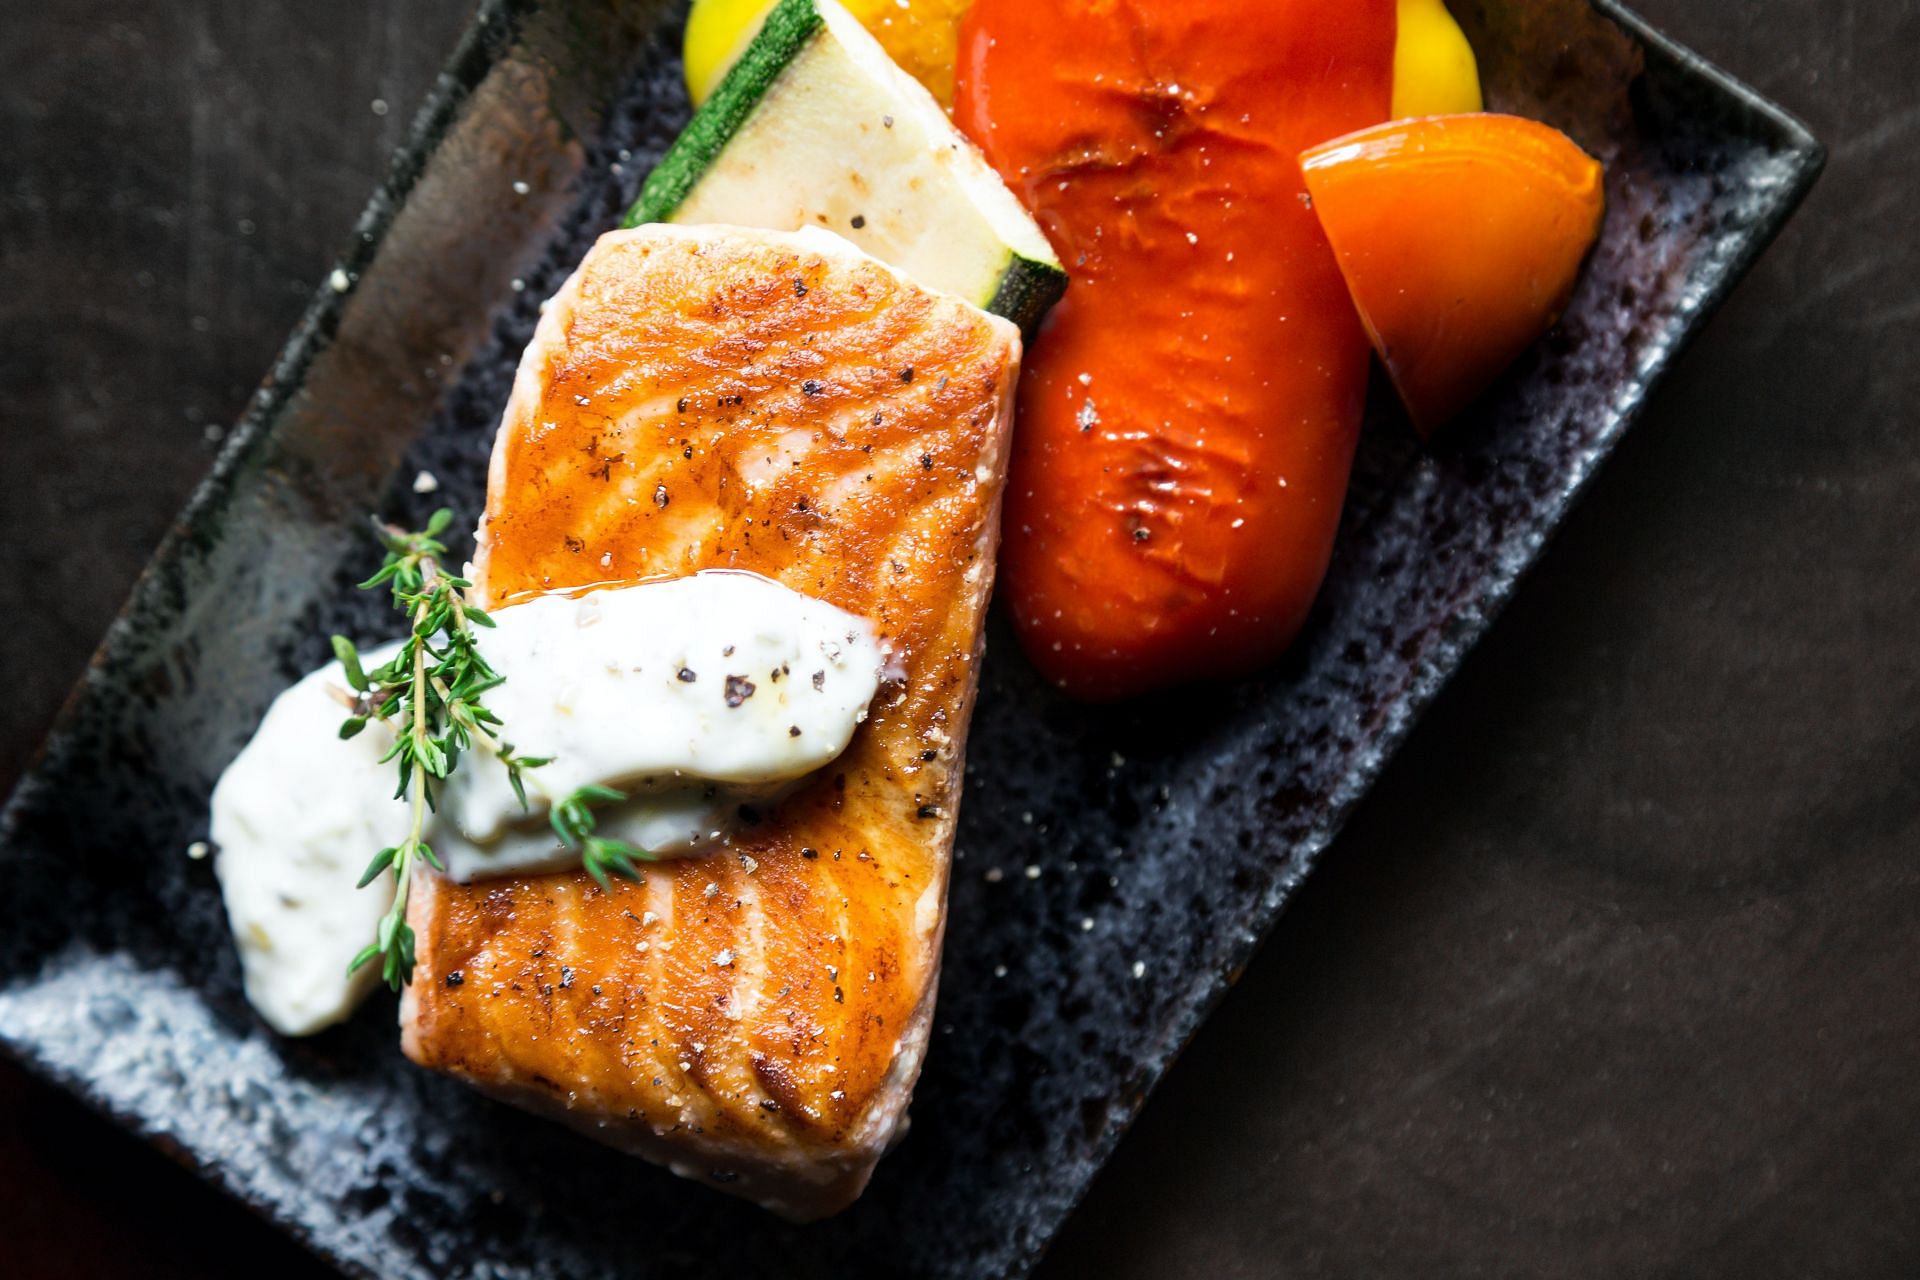 Salmon has all the nutrients necessary for bigger butt. (Image via Pexels/Malidate Van)